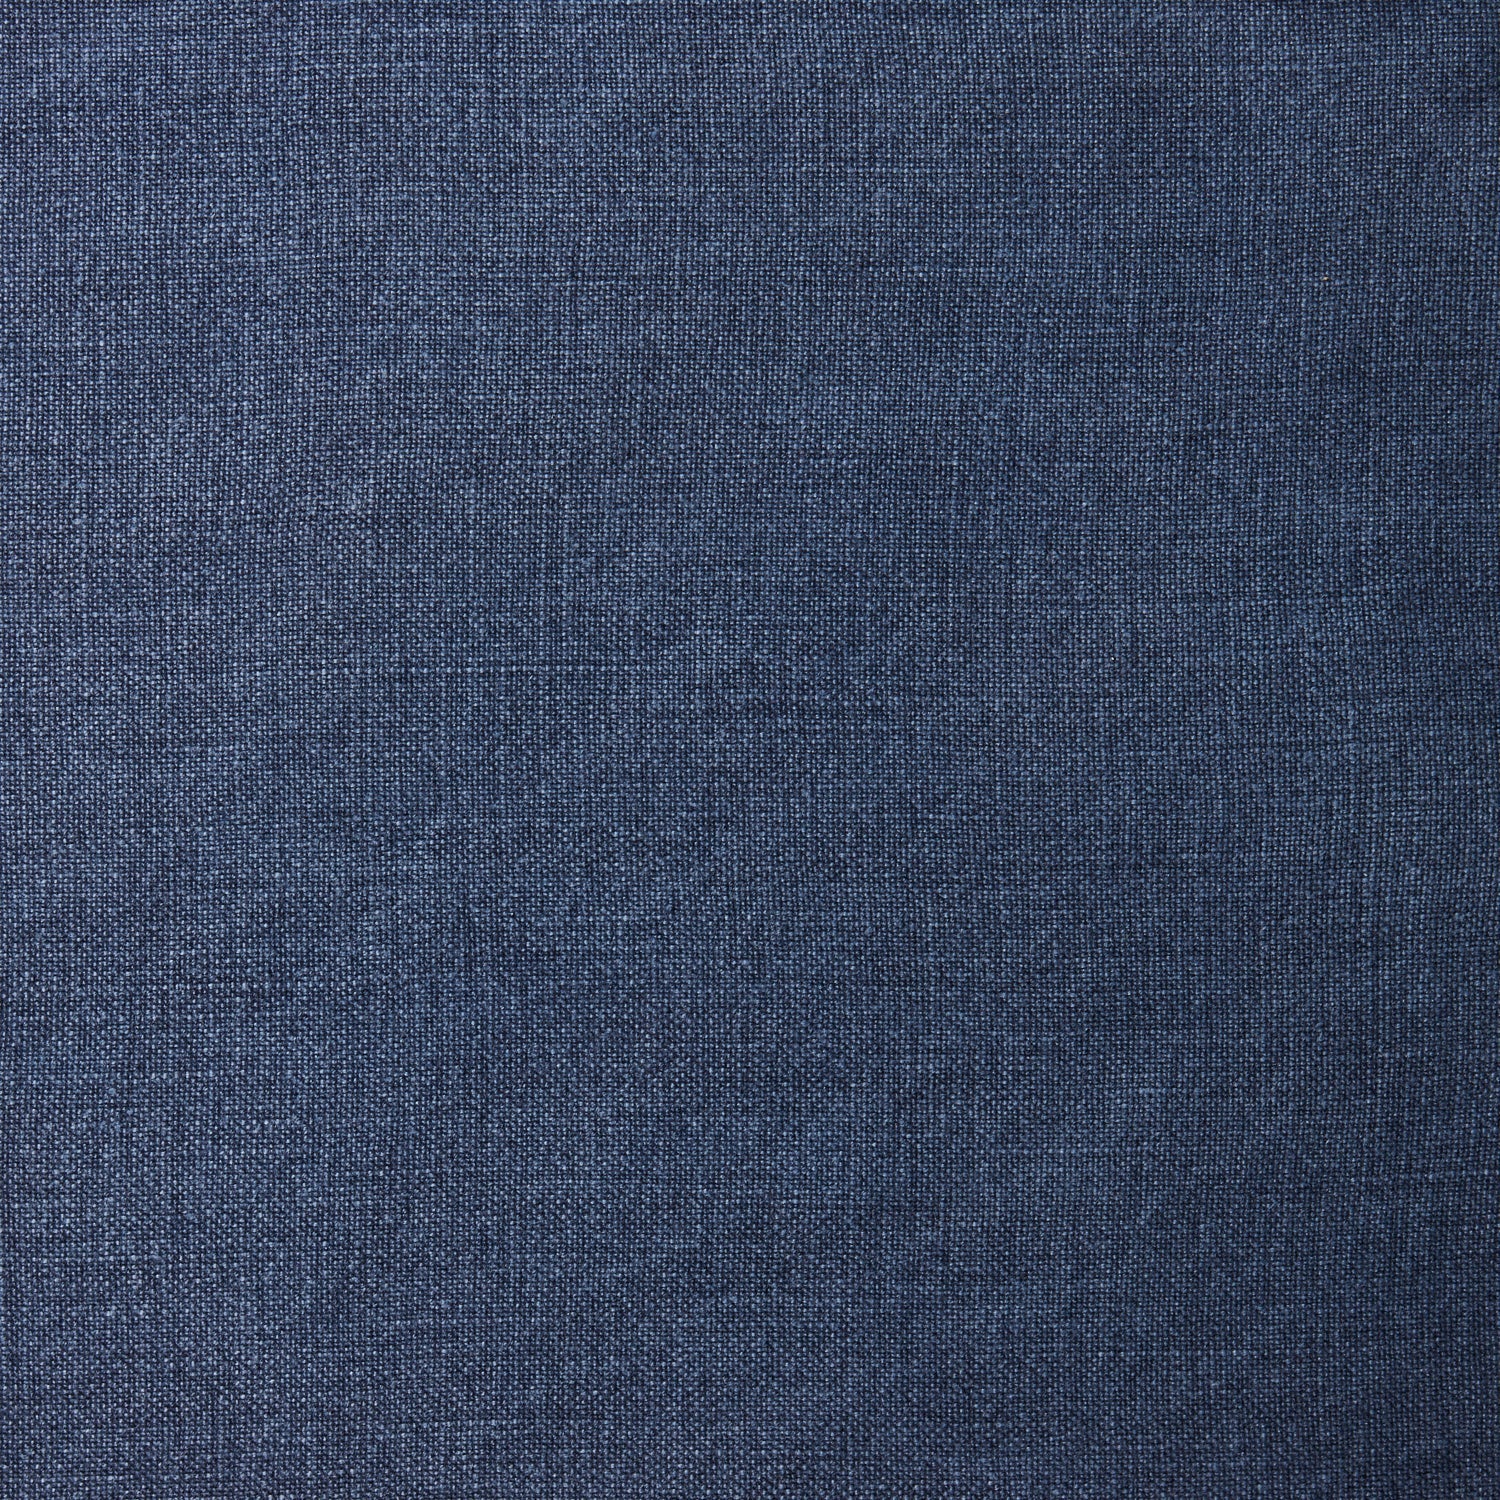 A  swatch of blended linen fabric in a solid navy color.